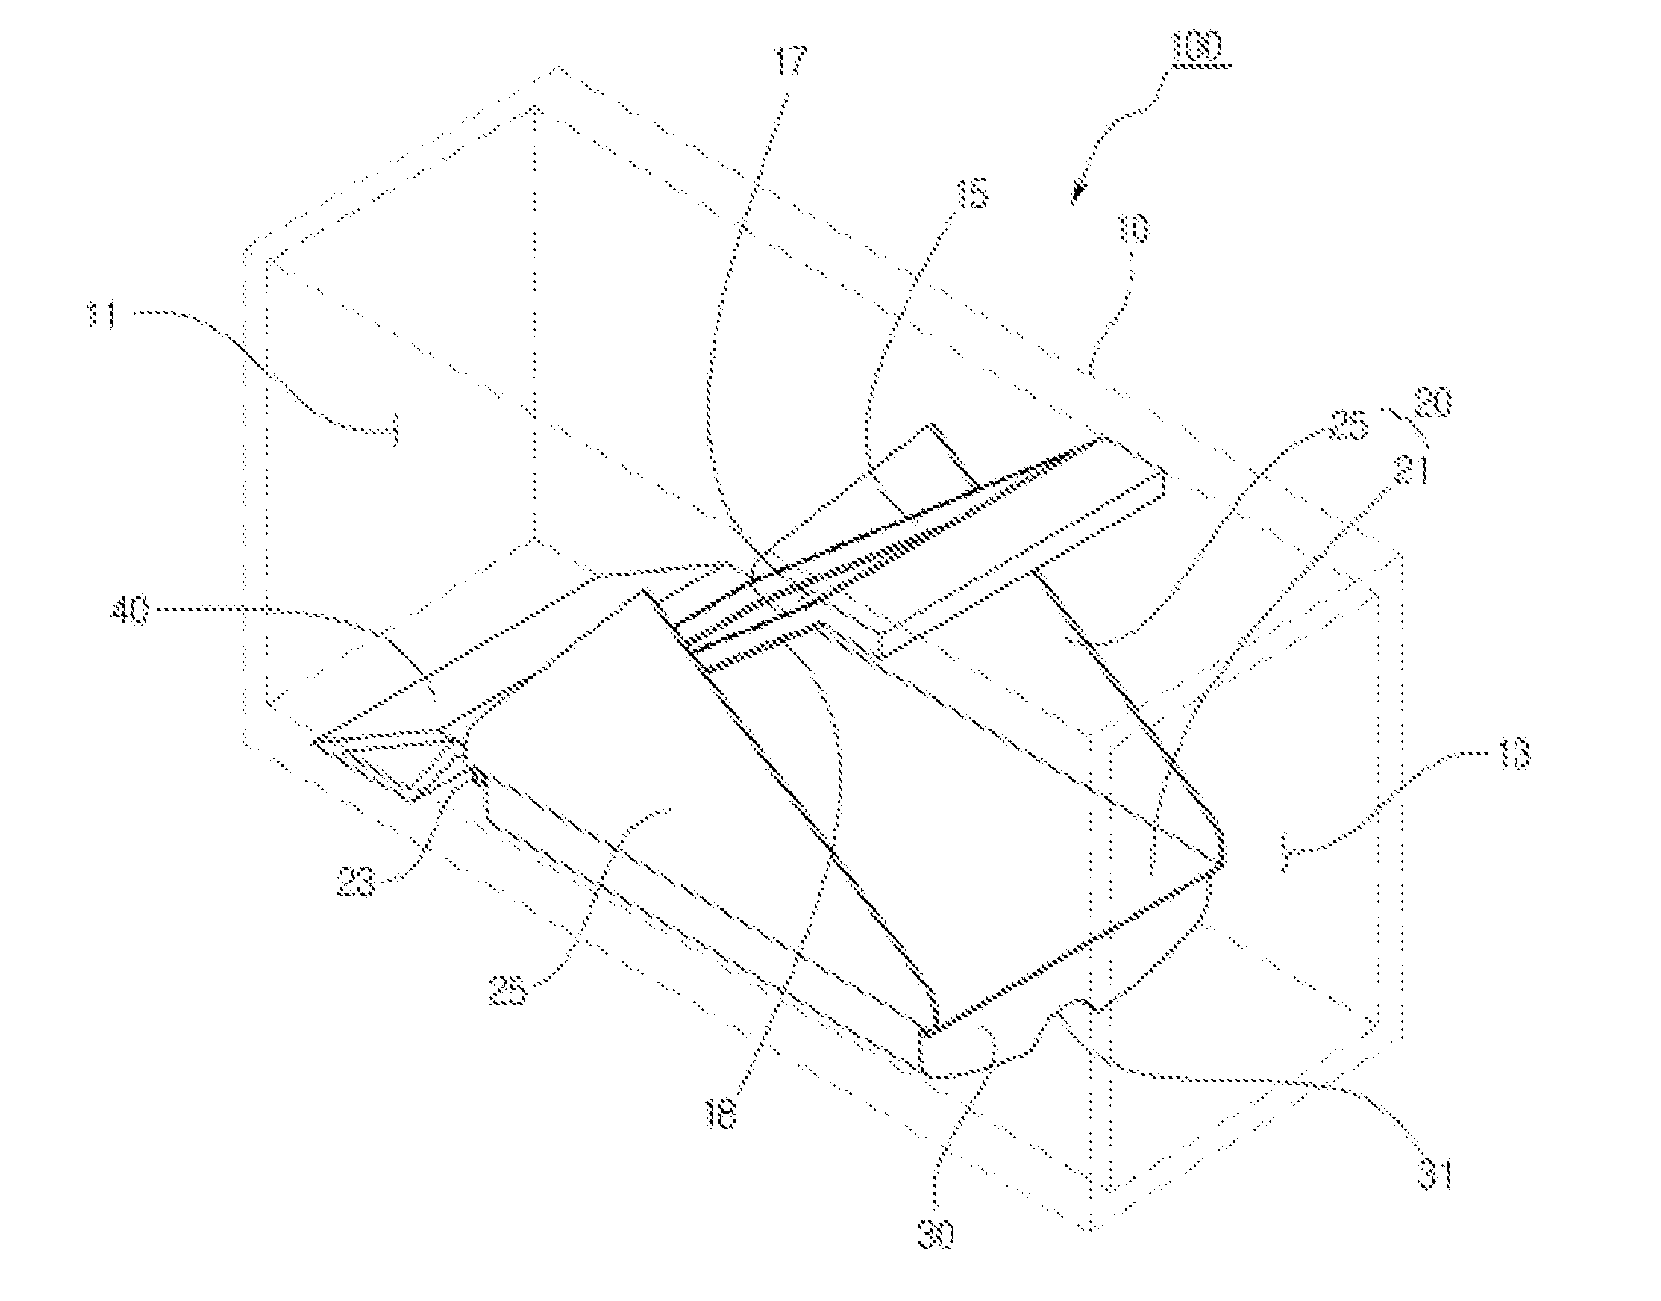 Unpowered apparatus for preventing backflow